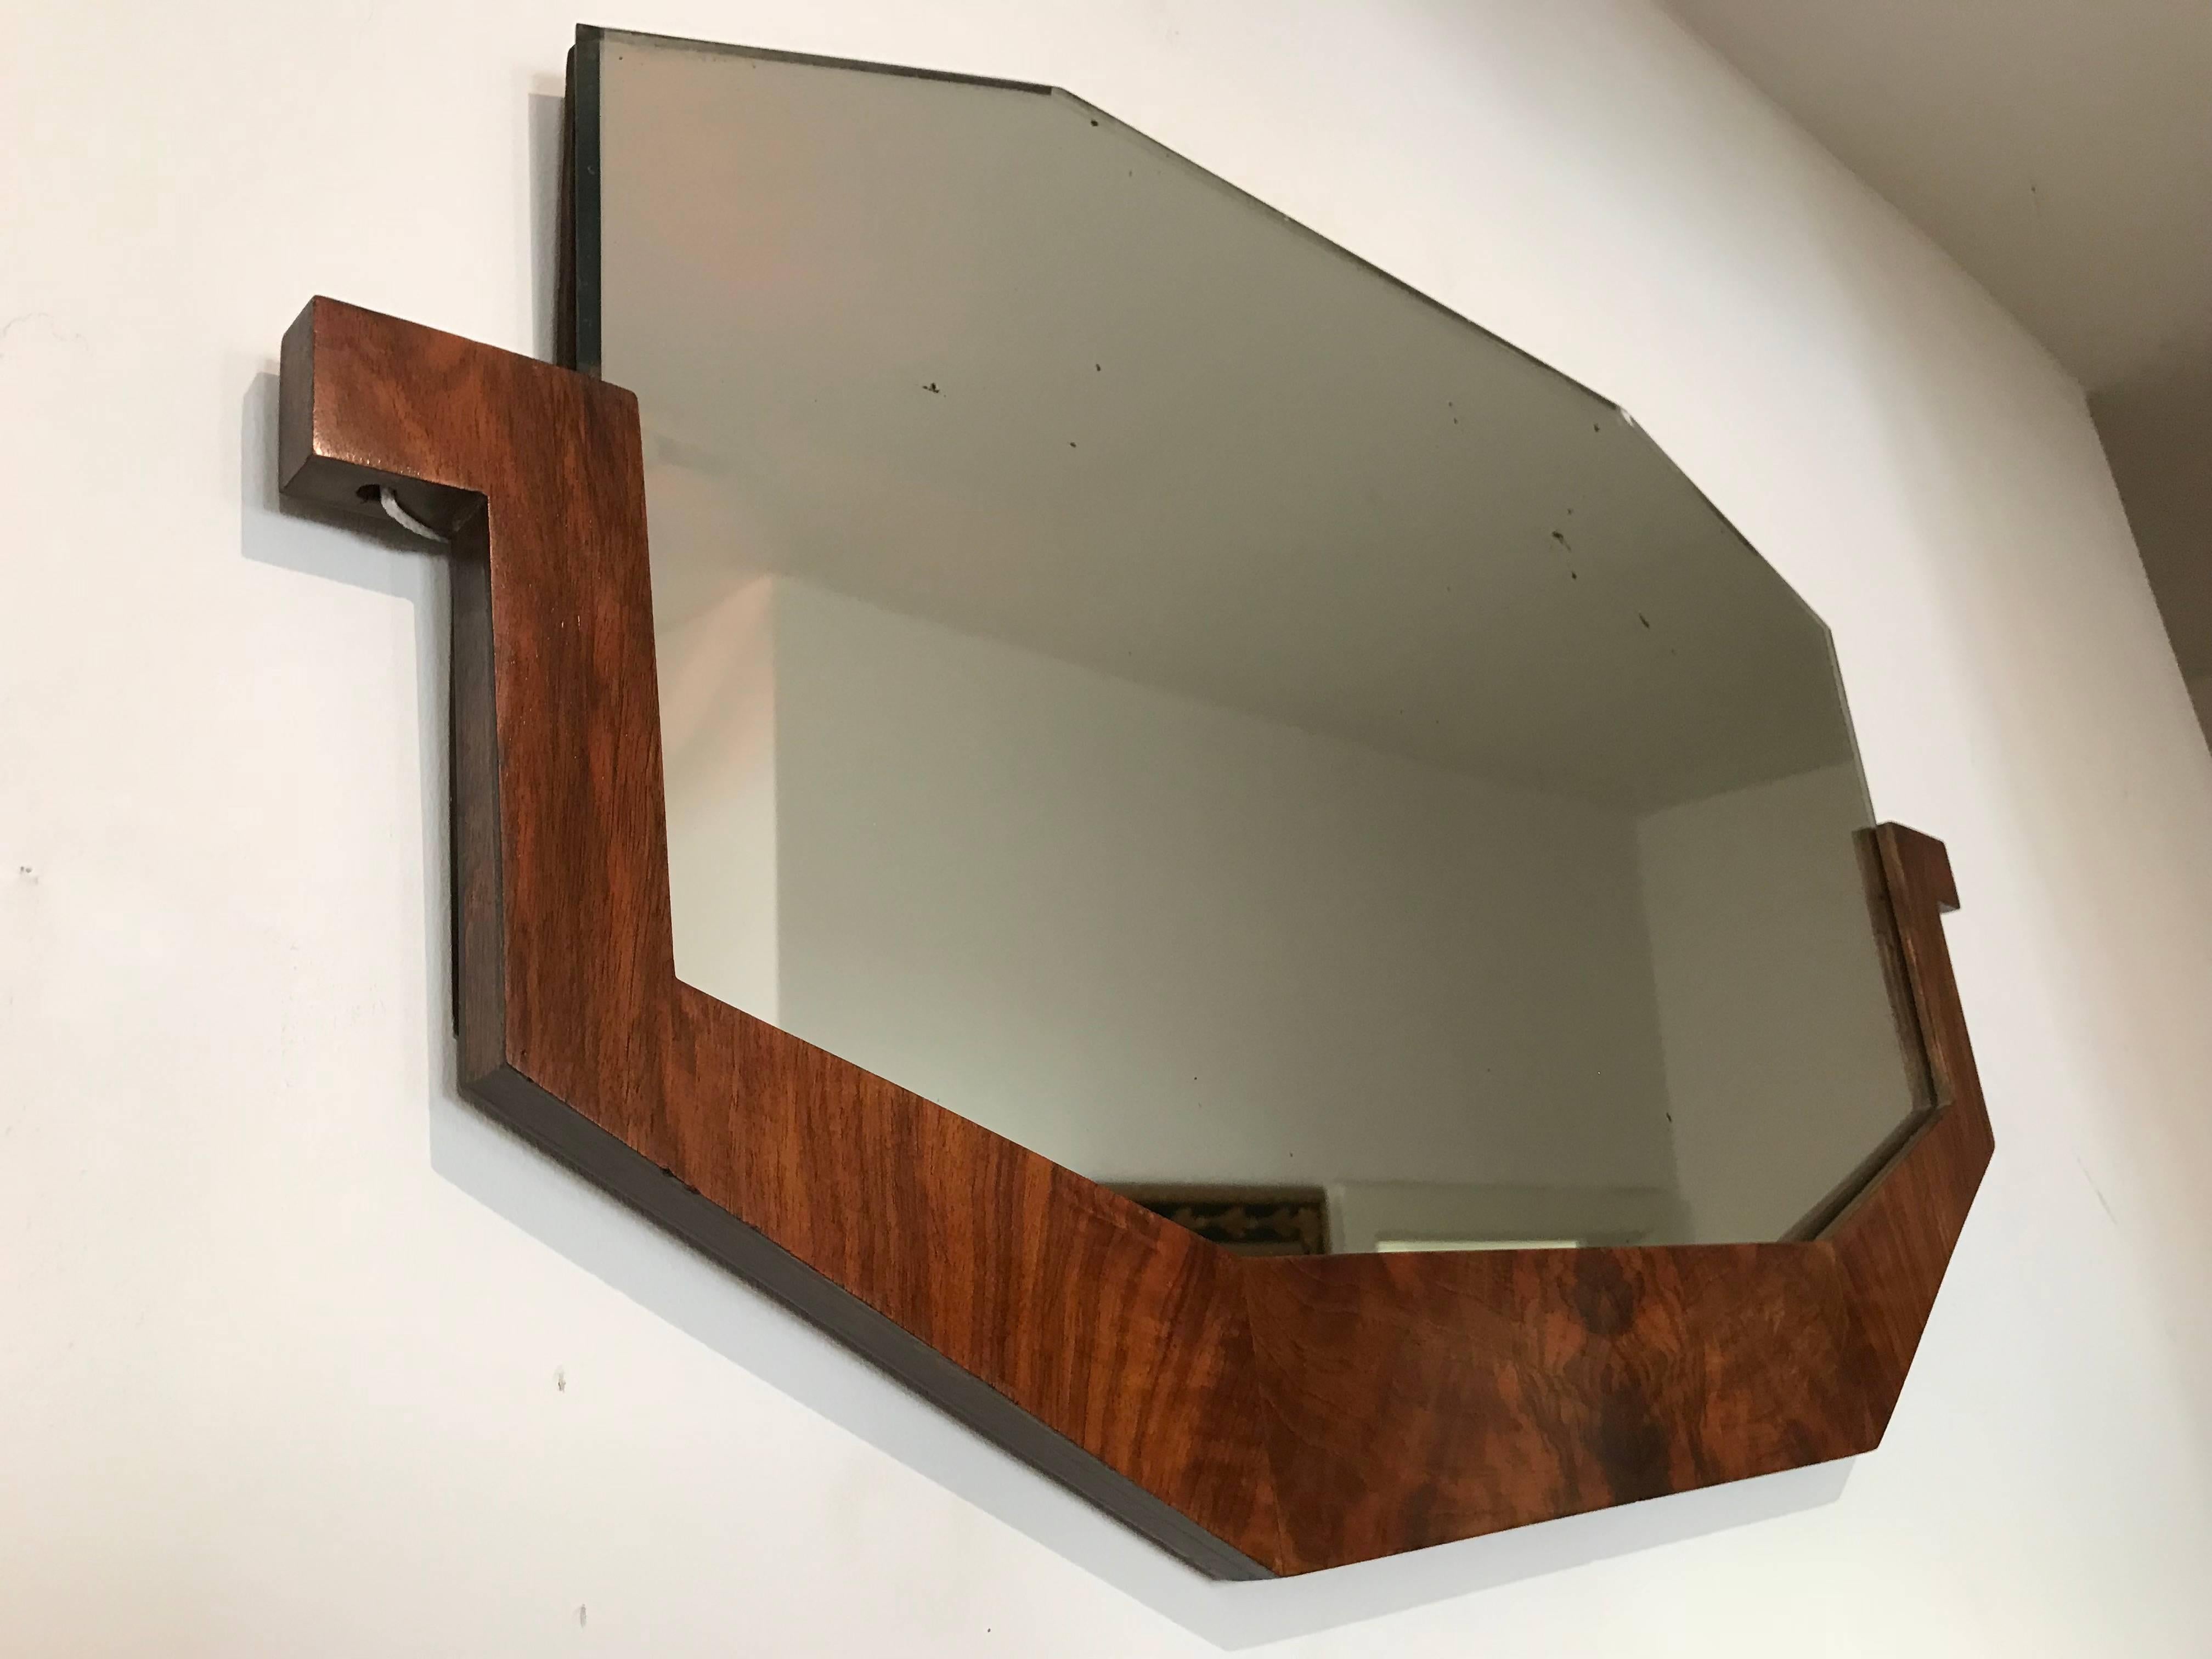 Wonderful original Art Deco Mirror from France, circa 1930. 
The frame is solid and veneered walnut with a nice grain and hand-polished with shellac. The mirror glass is still the original.